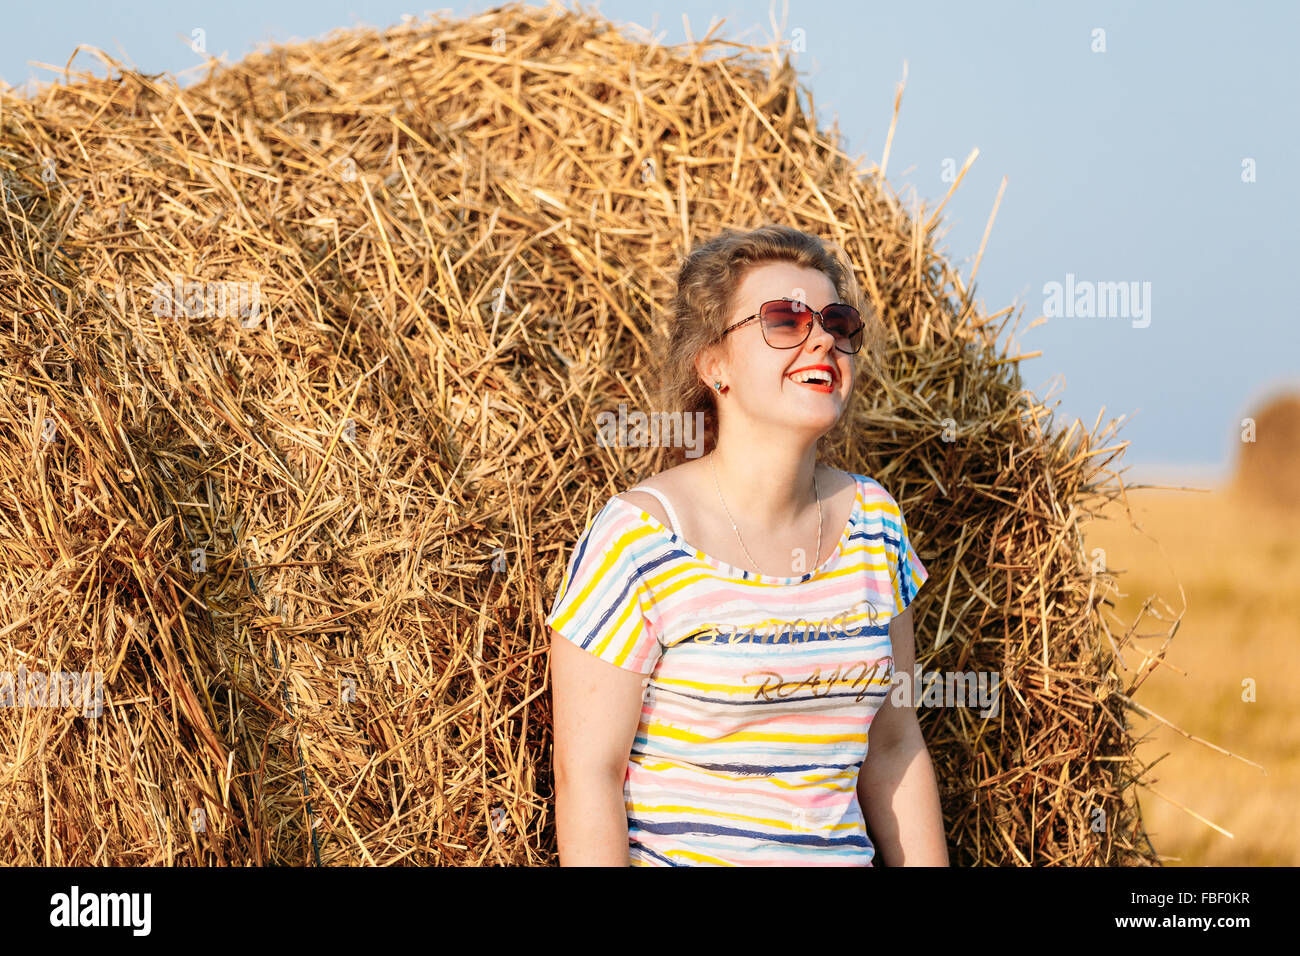 Beautiful Plus Size Young Woman In Shirt Posing In Summer Field Meadow On Hay Bales At Sunset Background Stock Photo